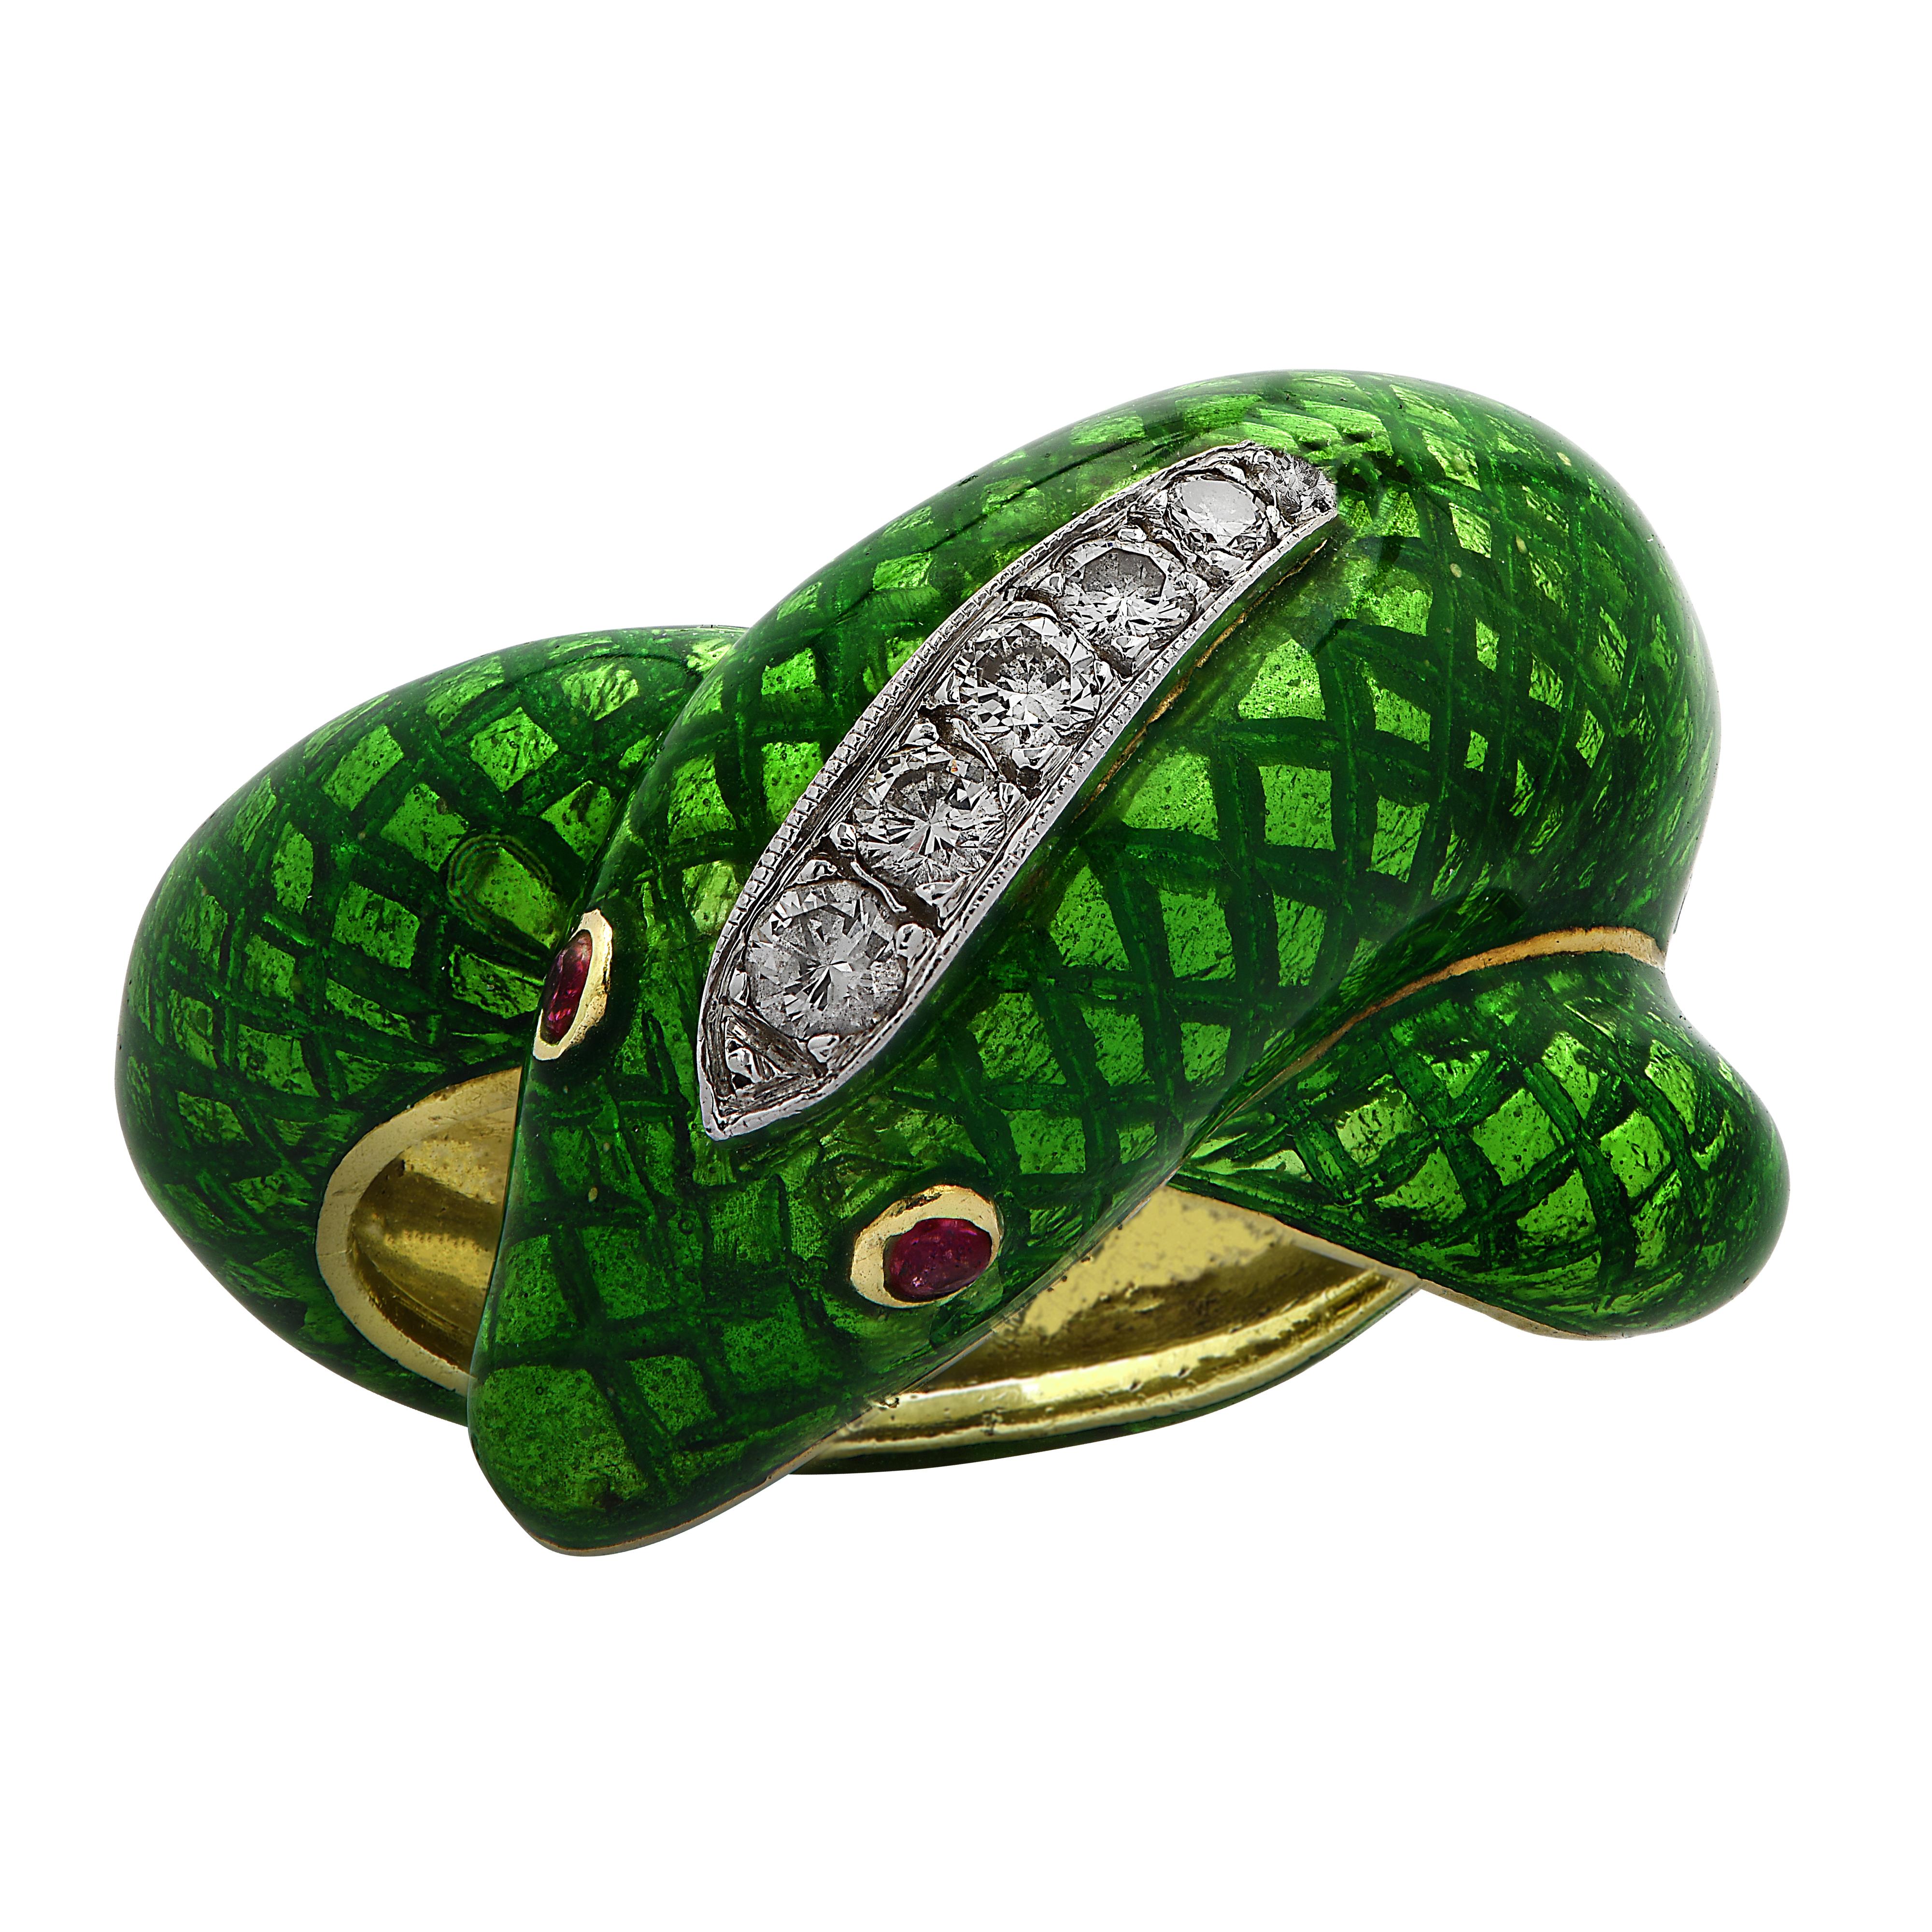 Sensational snake ring crafted in yellow and white gold and green enamel, featuring 6 round brilliant cut diamonds weighing approximately 0.20 carats total, G color, VS-SI clarity. The body of the snake is covered in green enamel scales and the head